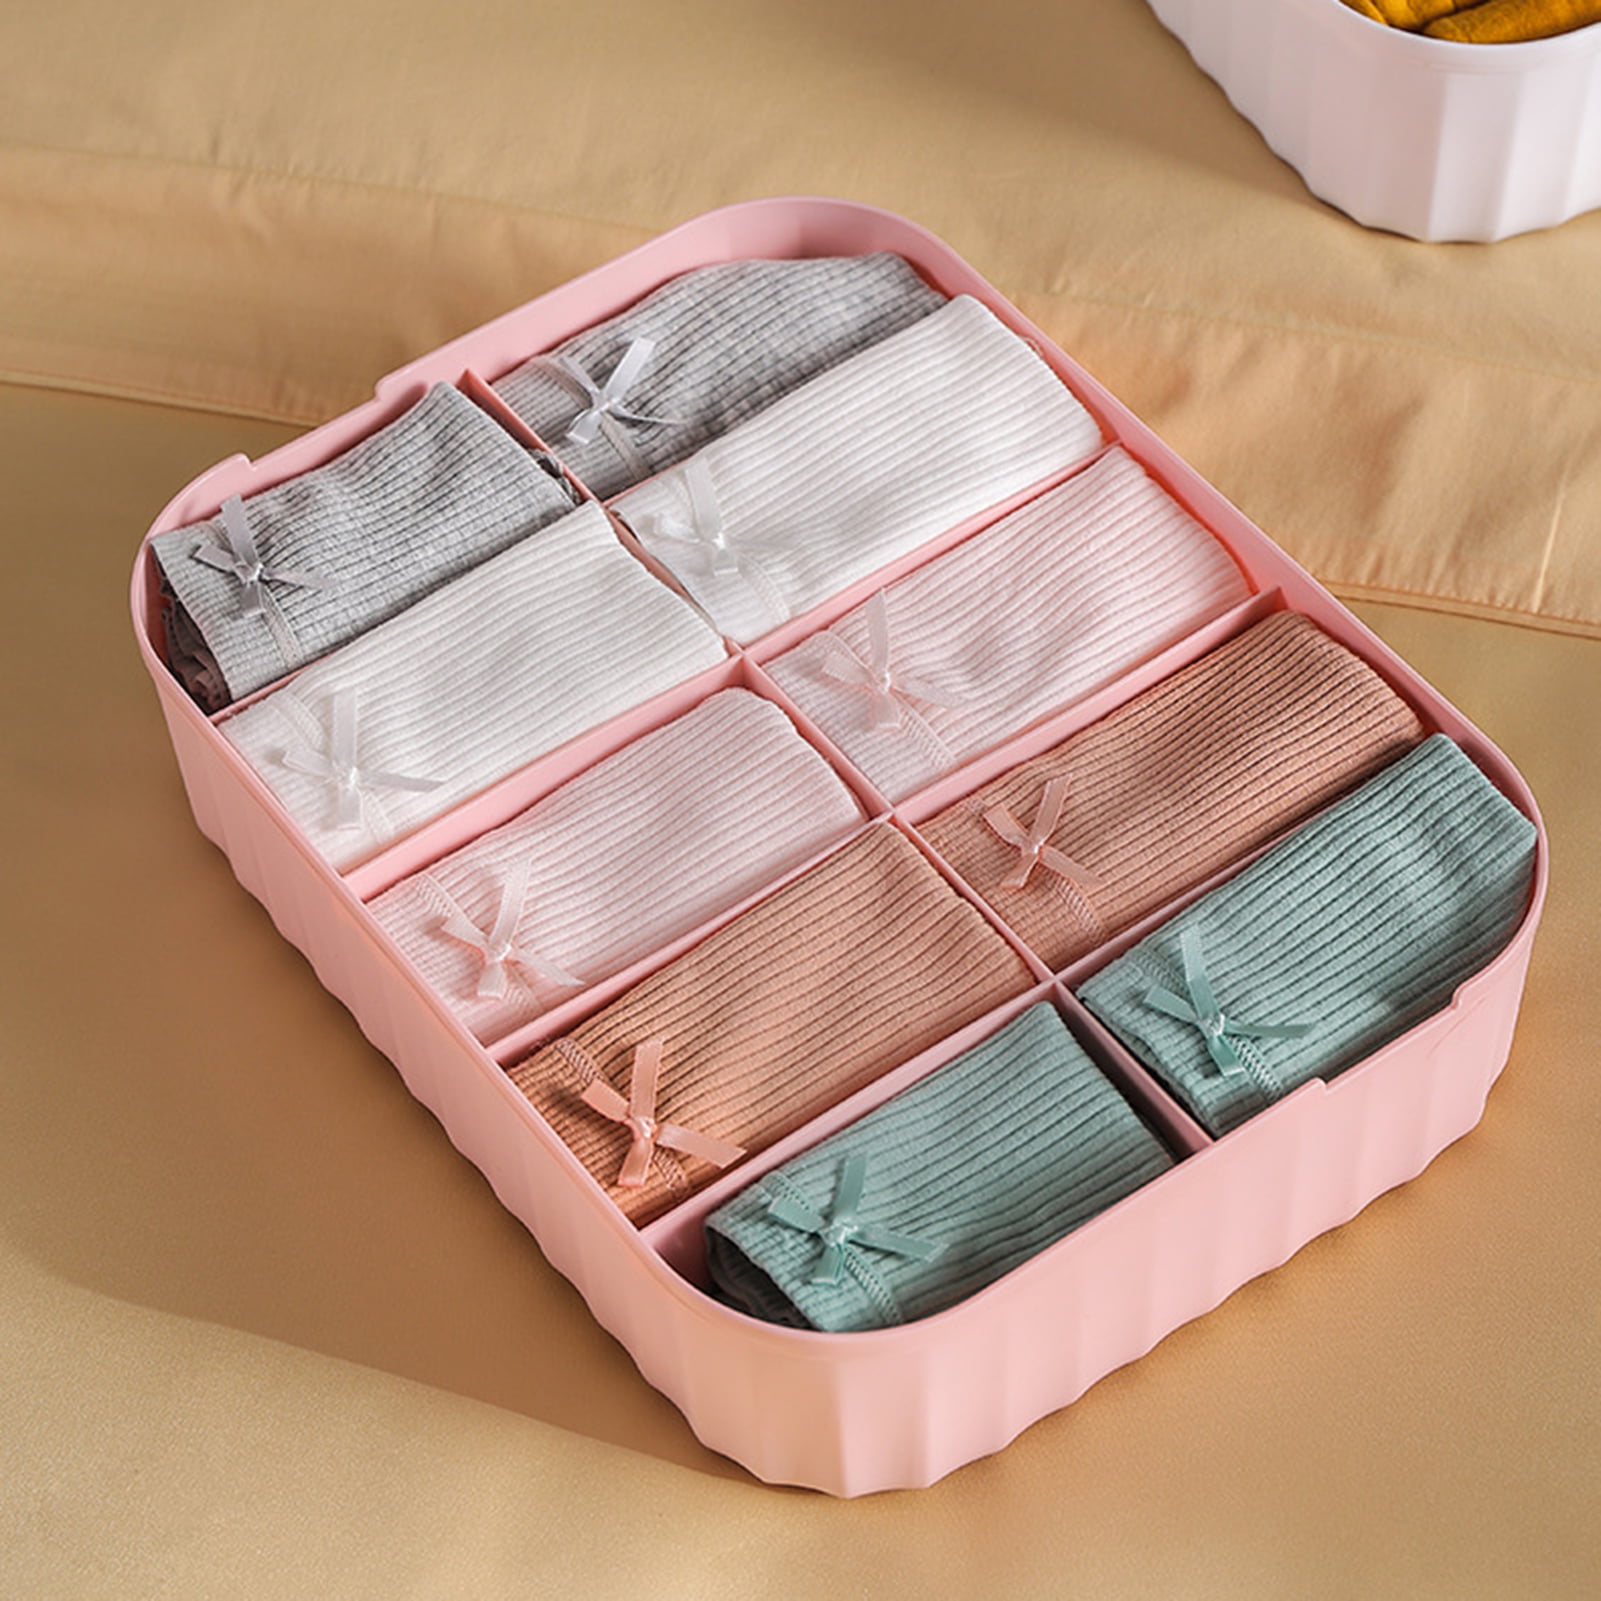 1pc Plastic Storage Basket, Bathroom Cosmetic & Skin Care Products Organizer,  Can Be Used To Organize Socks, Underwear And Other Items